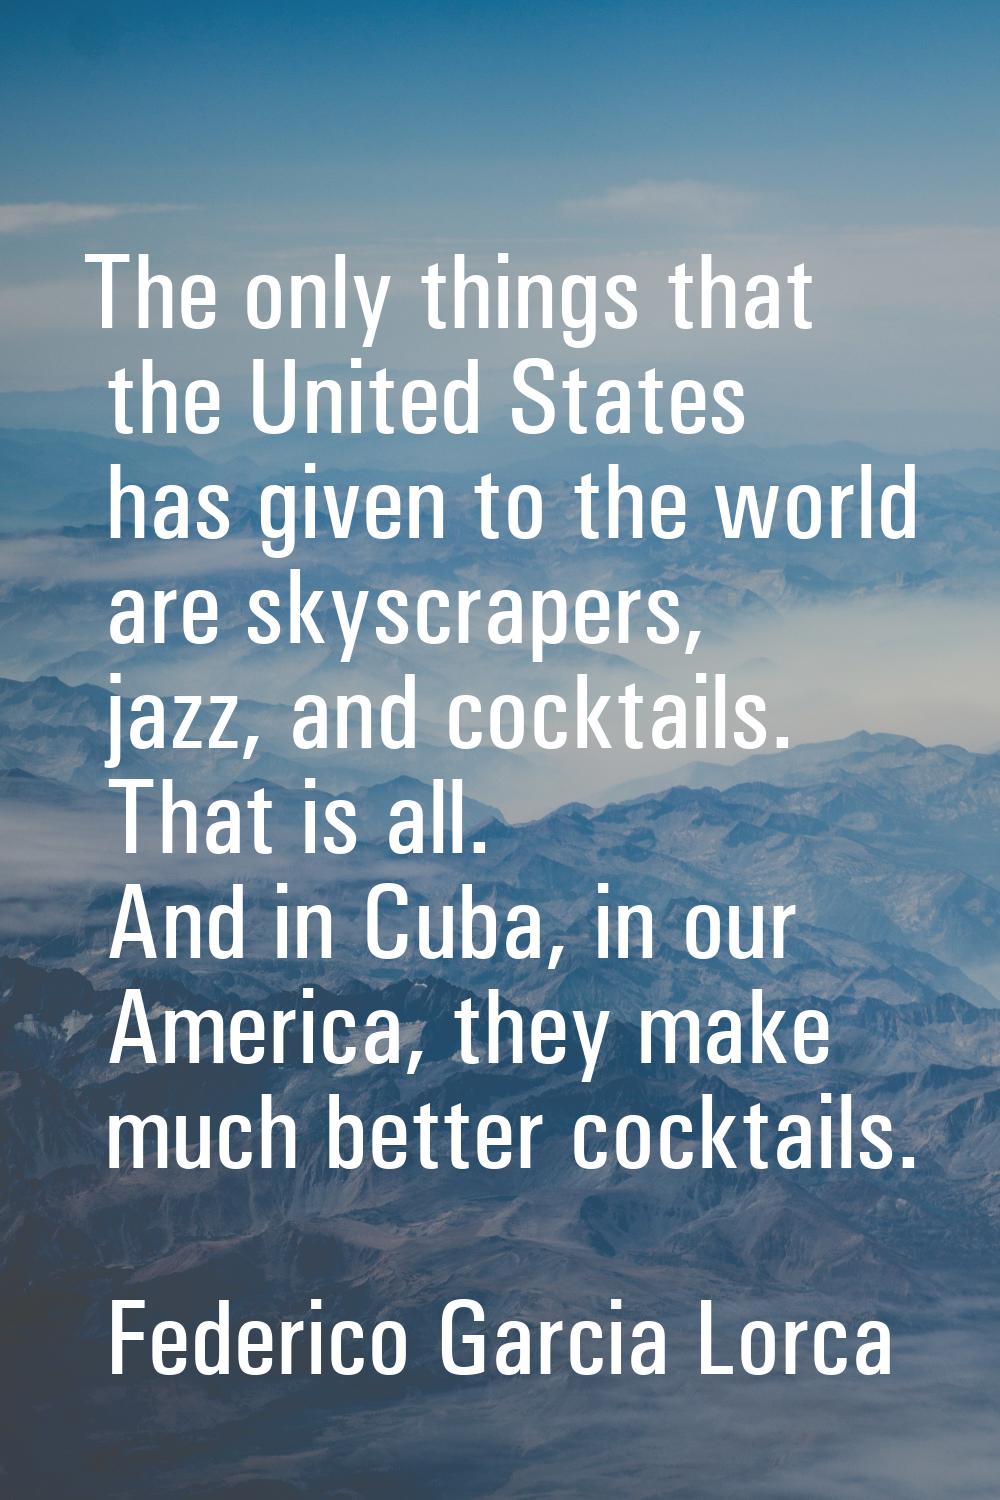 The only things that the United States has given to the world are skyscrapers, jazz, and cocktails.